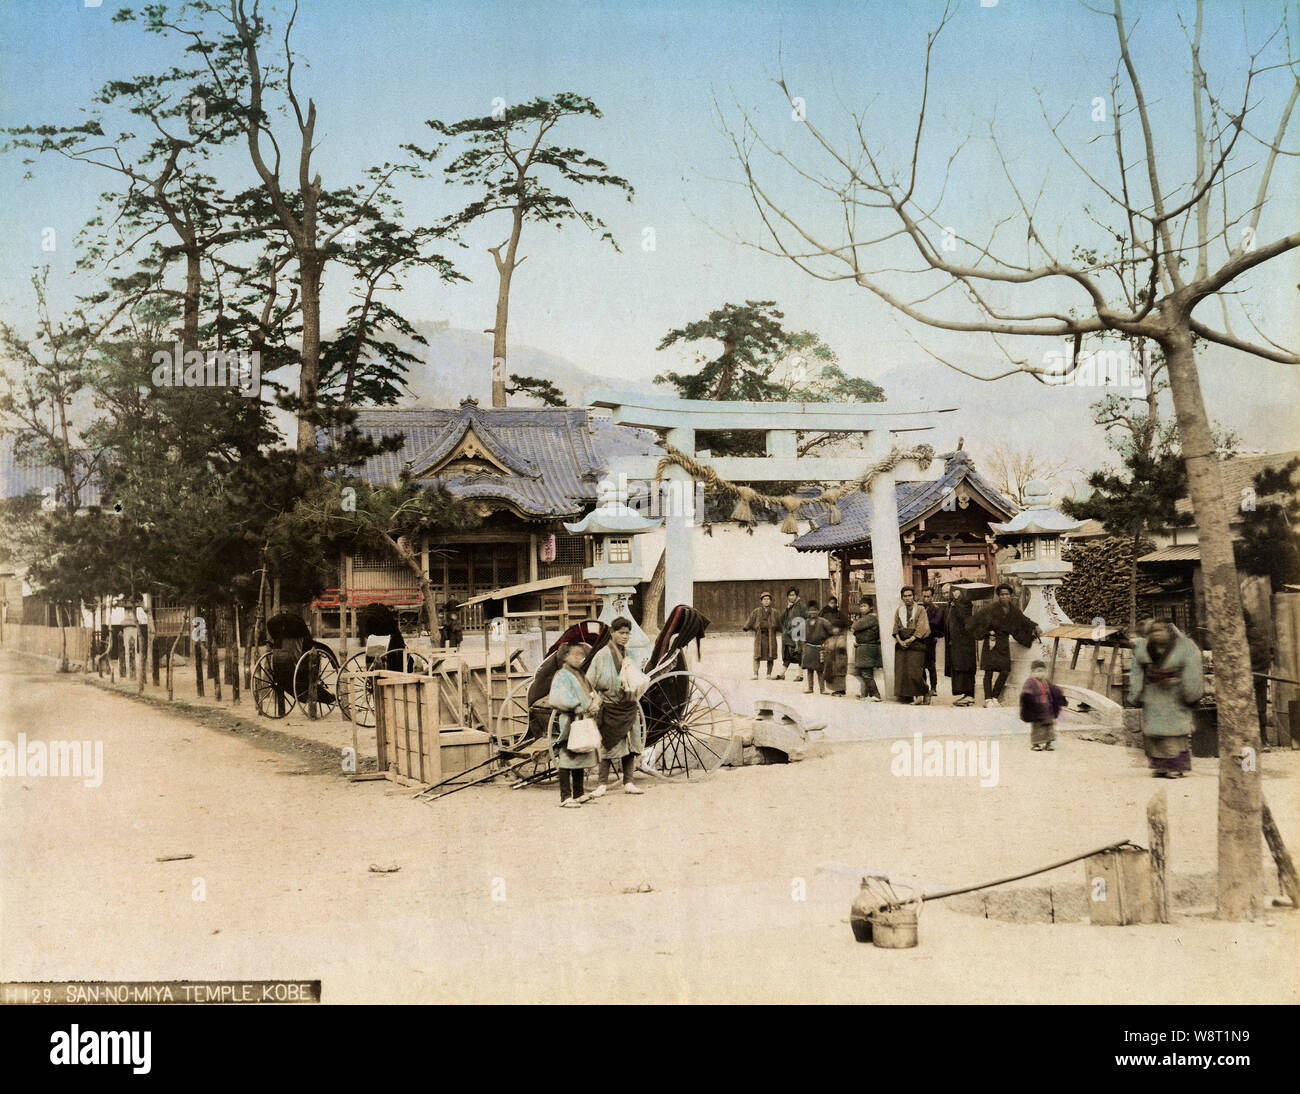 [ 1890s Japan - Sannomiya Shrine, Kobe ] —   Sannomiya Shrine (三ノ宮神社) in Kobe.  On February 4, 1868 (Keio 4), the Kobe Incident (神戸事件) took place in front of this shrine when samurai from the Bizen domain (in what is now Okayama Prefecture) started firing when two French sailors interfered with their march, a strictly forbidden act in Japan known as tomowari (供割). Zenzaburou Taki (滝 善三郎, 1837-1868), an officer with the Bizen forces (第3砲兵隊長),  took responsibility for this incident by committing seppuku.  19th century vintage albumen photograph. Stock Photo